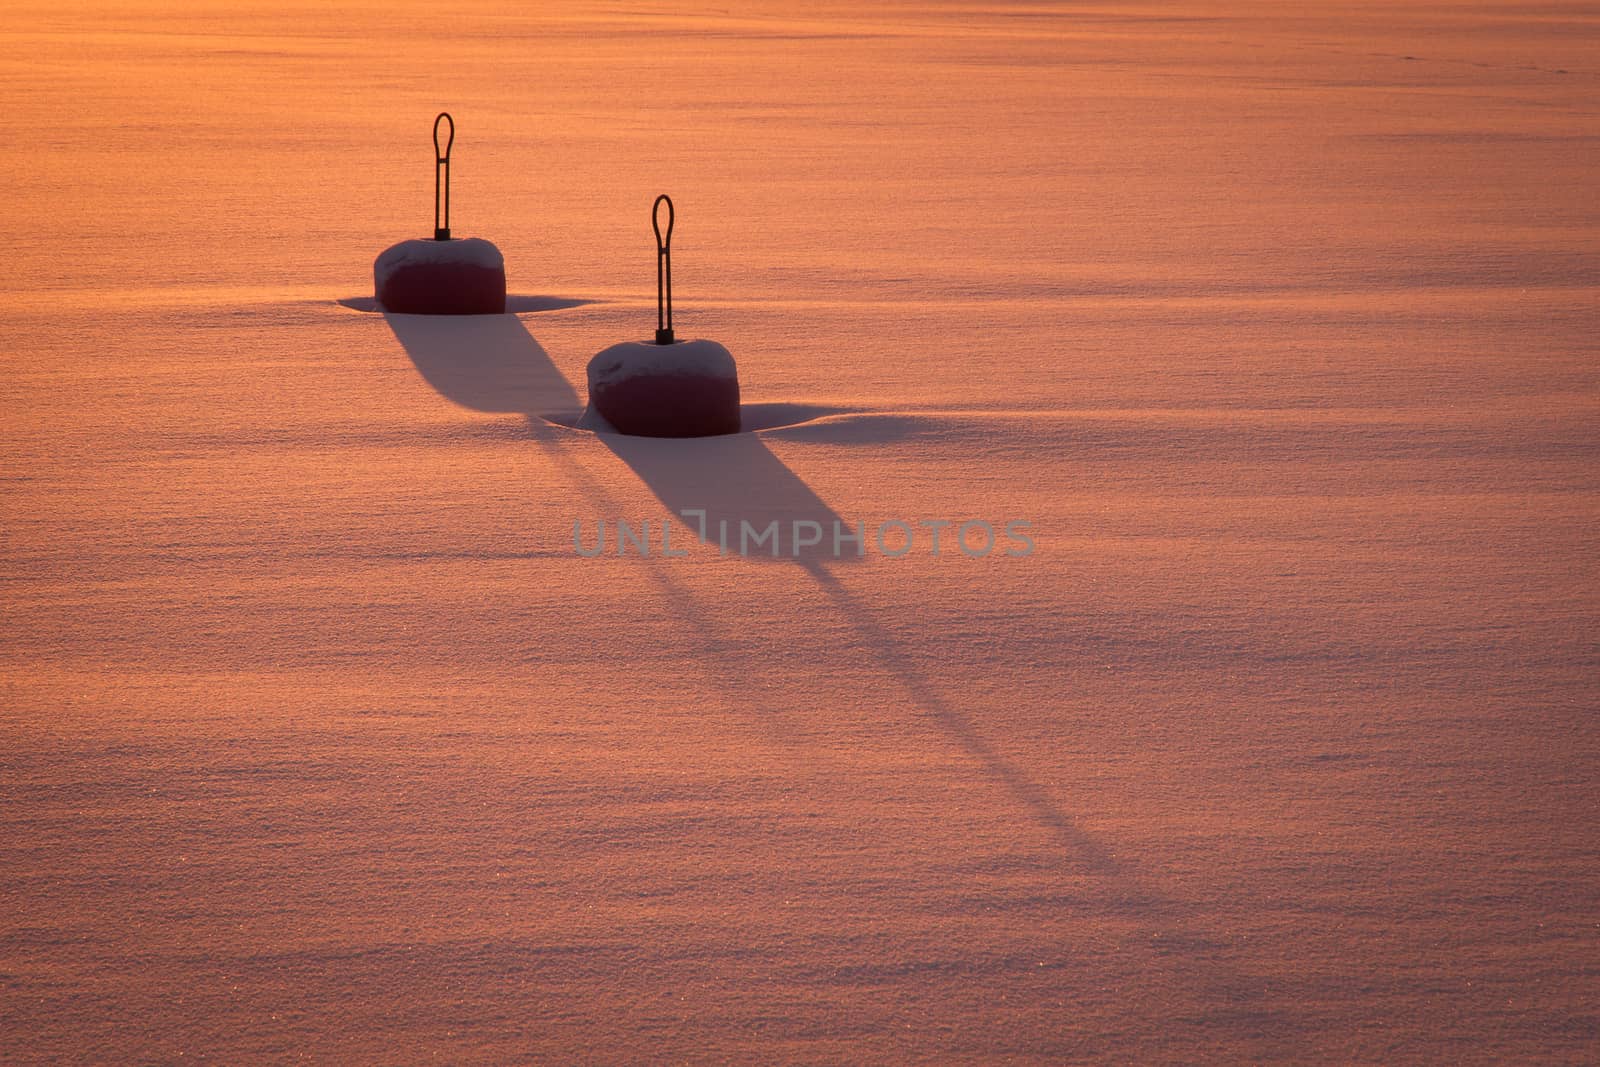 Winter image with two buoys in the frozen ocean.